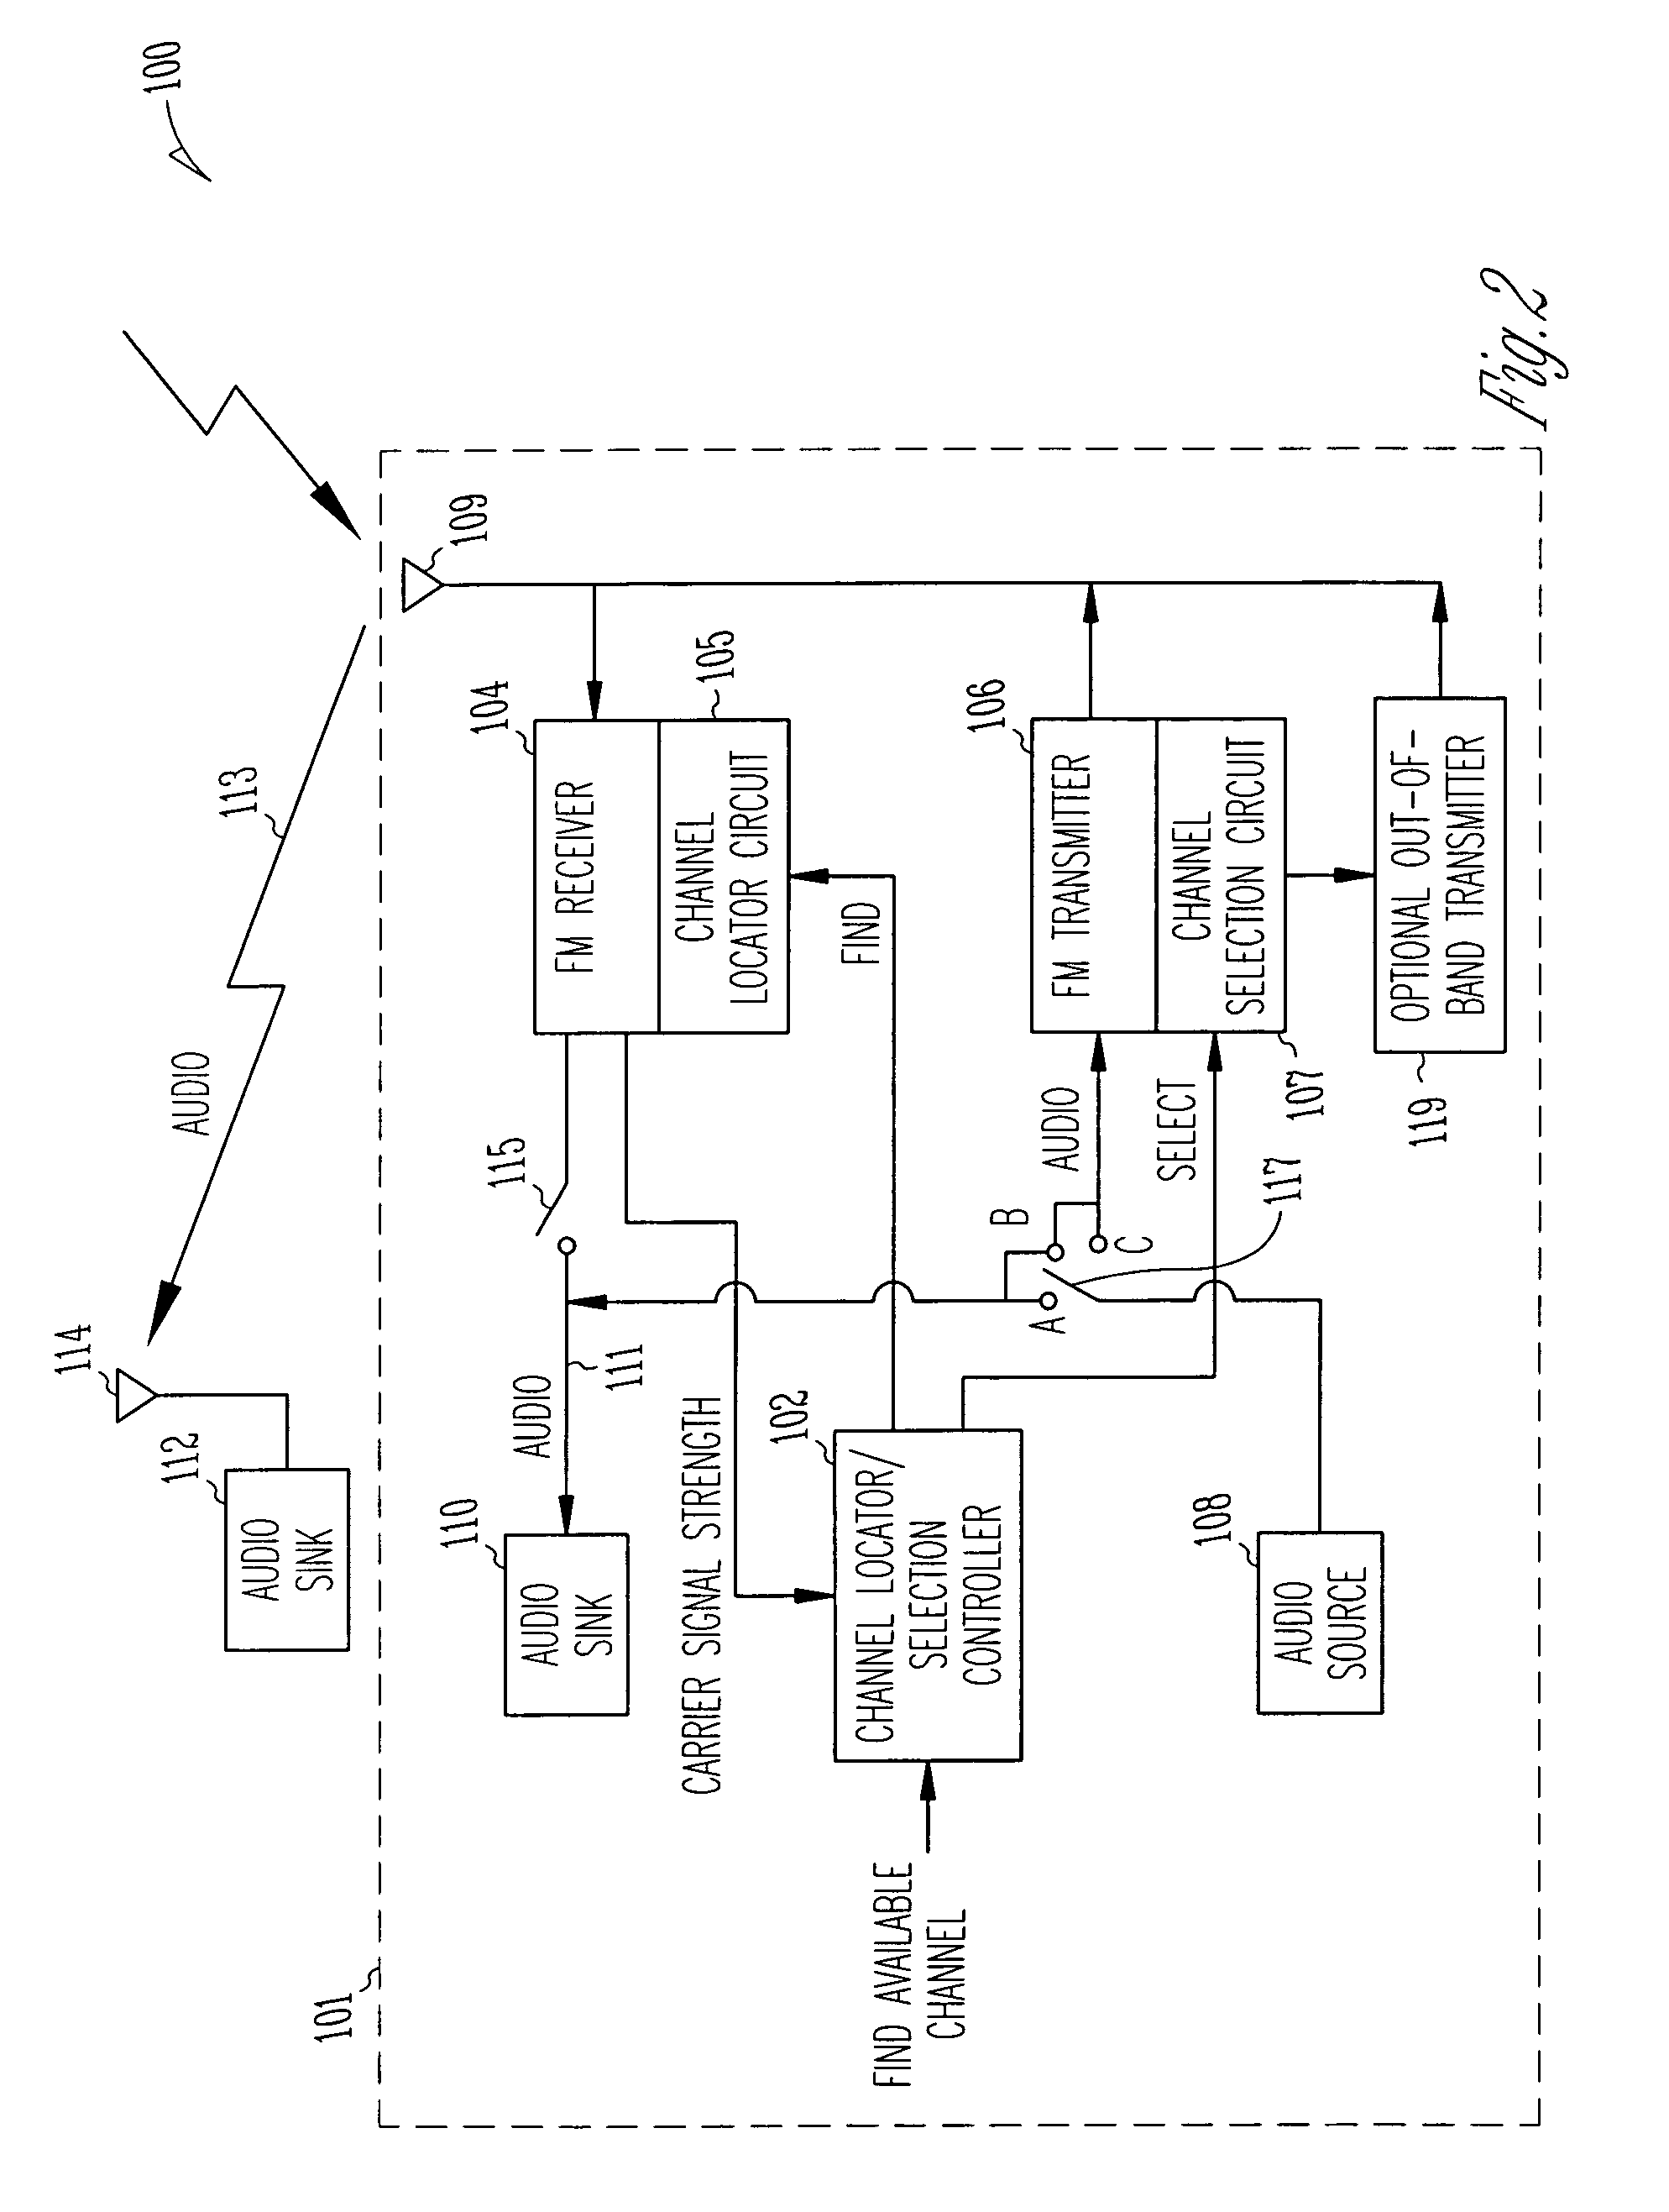 Apparatus and methods for finding and using available transmission frequencies